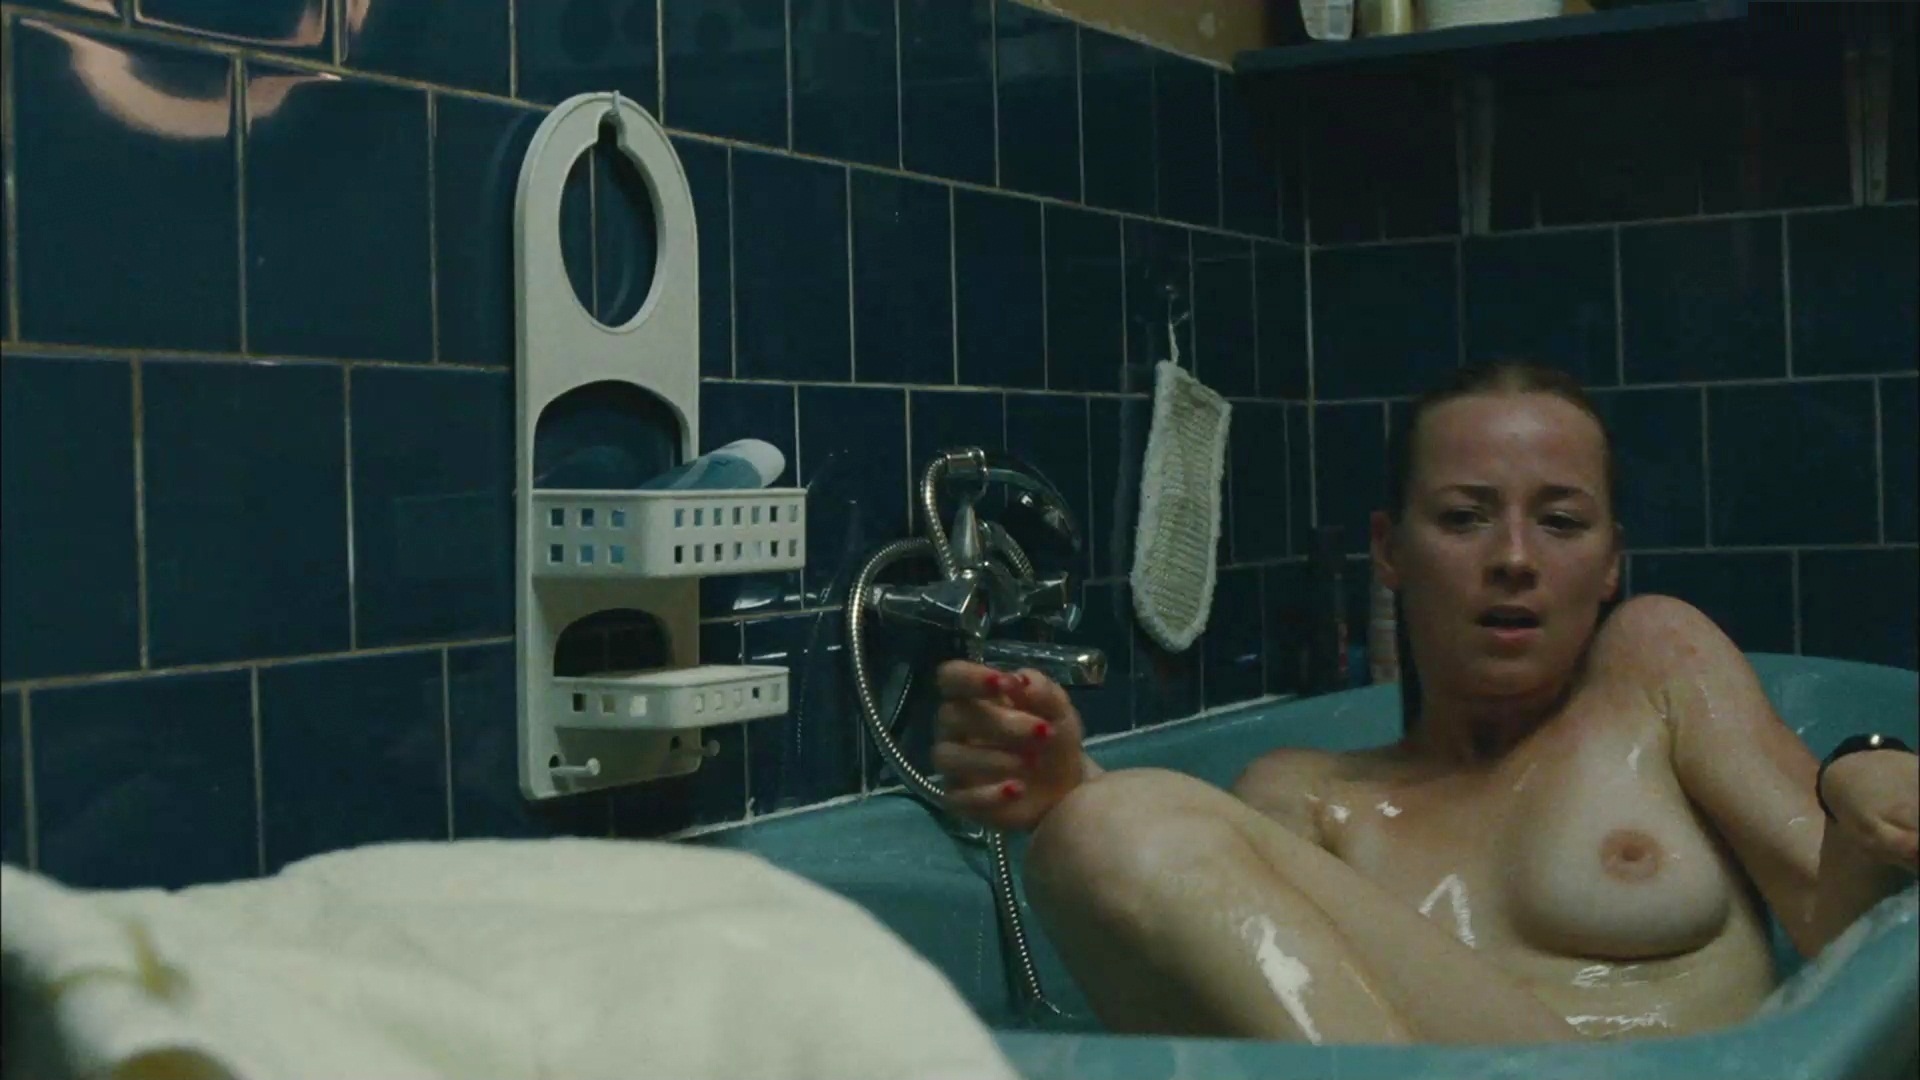 Porn images Naked Karine Vanasse In Switch, and naked karine vanasse in swi...